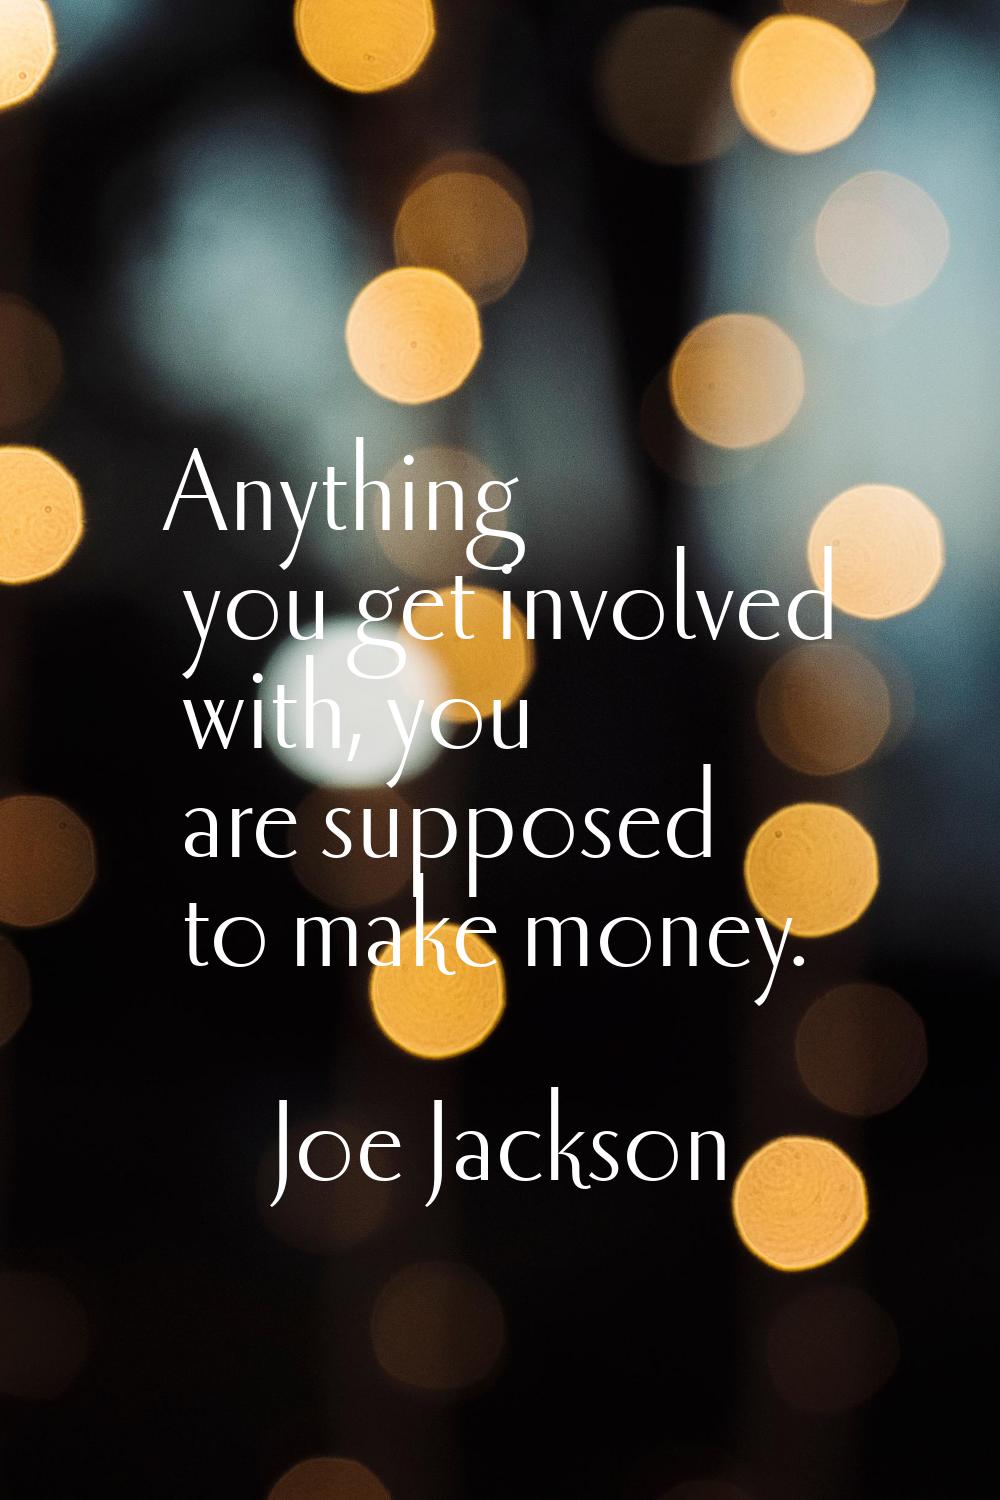 Anything you get involved with, you are supposed to make money.